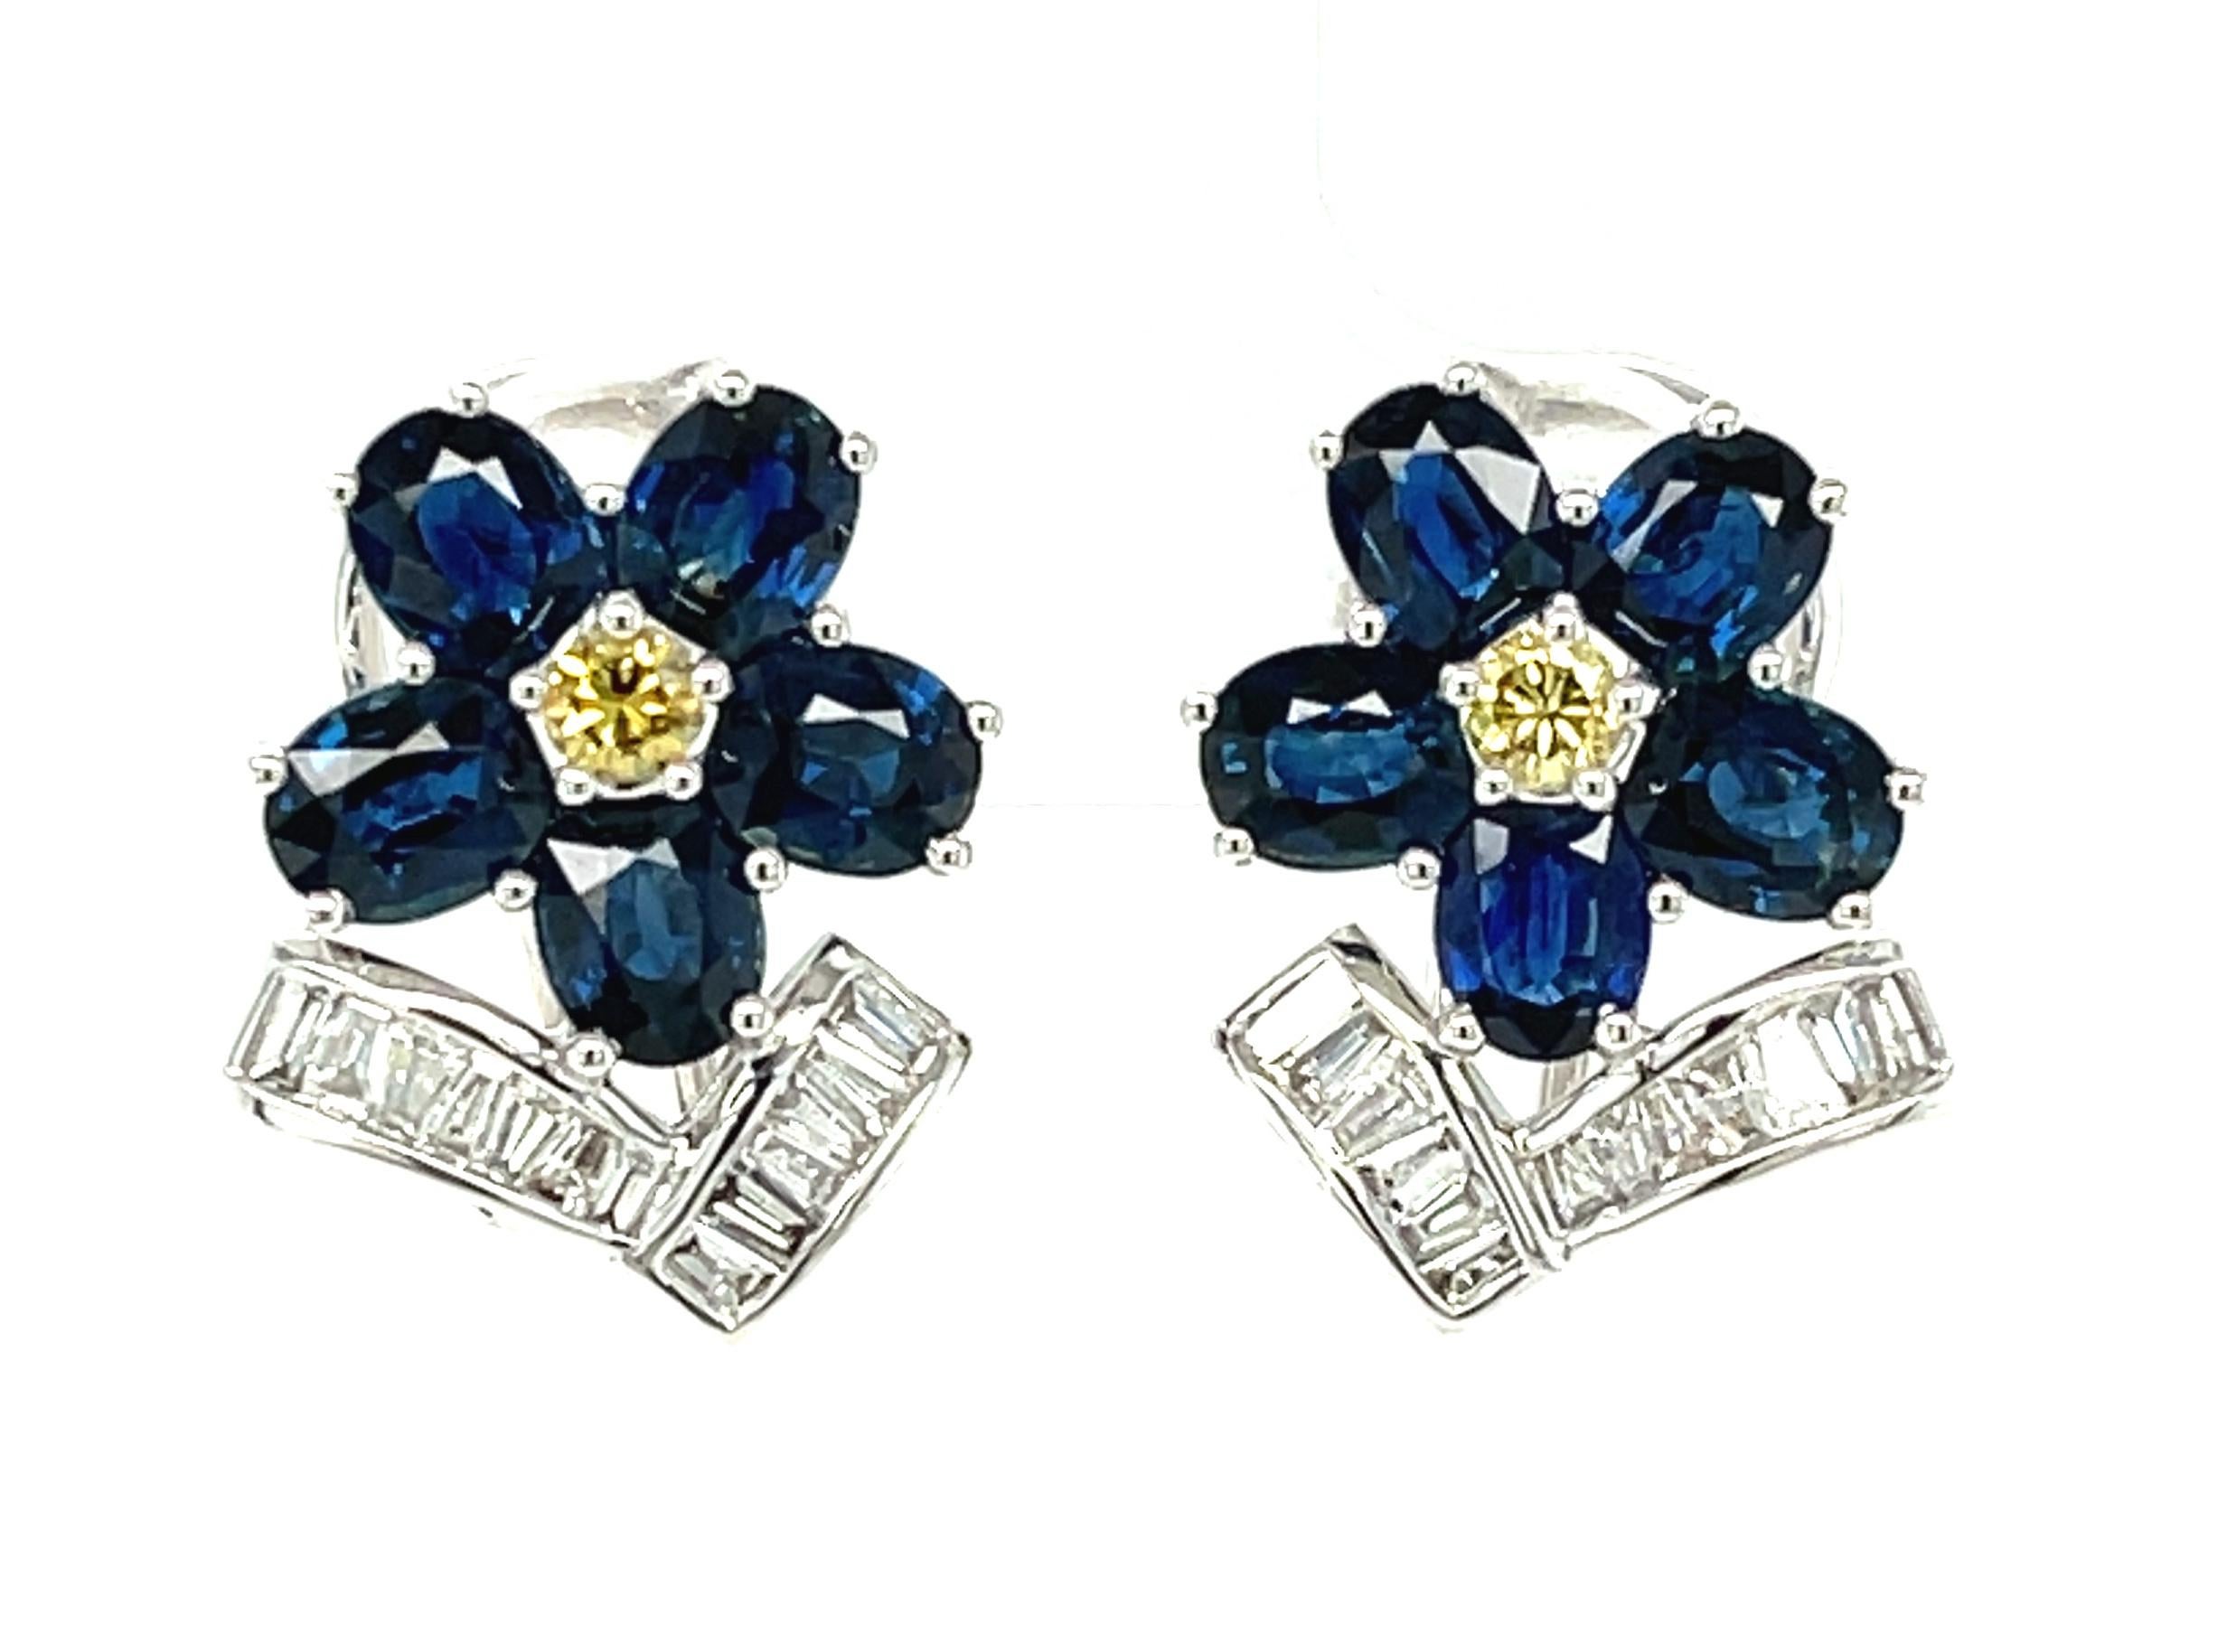 These beautiful earrings feature over 4 and a half carats of rich, royal blue sapphires, set in an exquisite floral design with with 2 brilliant cut yellow diamonds in the center of each 